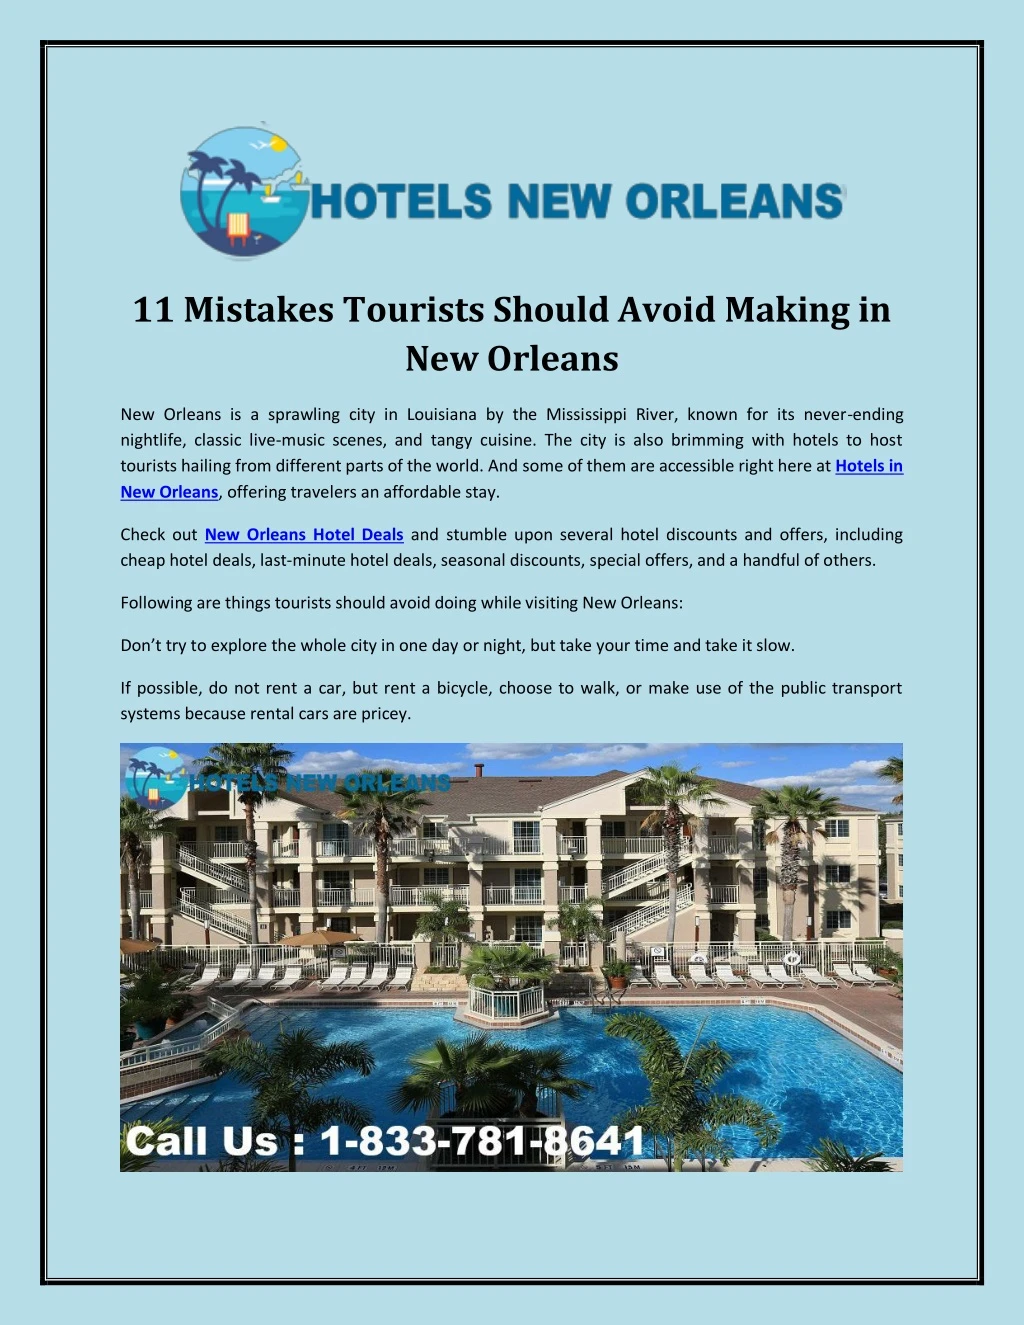 11 mistakes tourists should avoid making